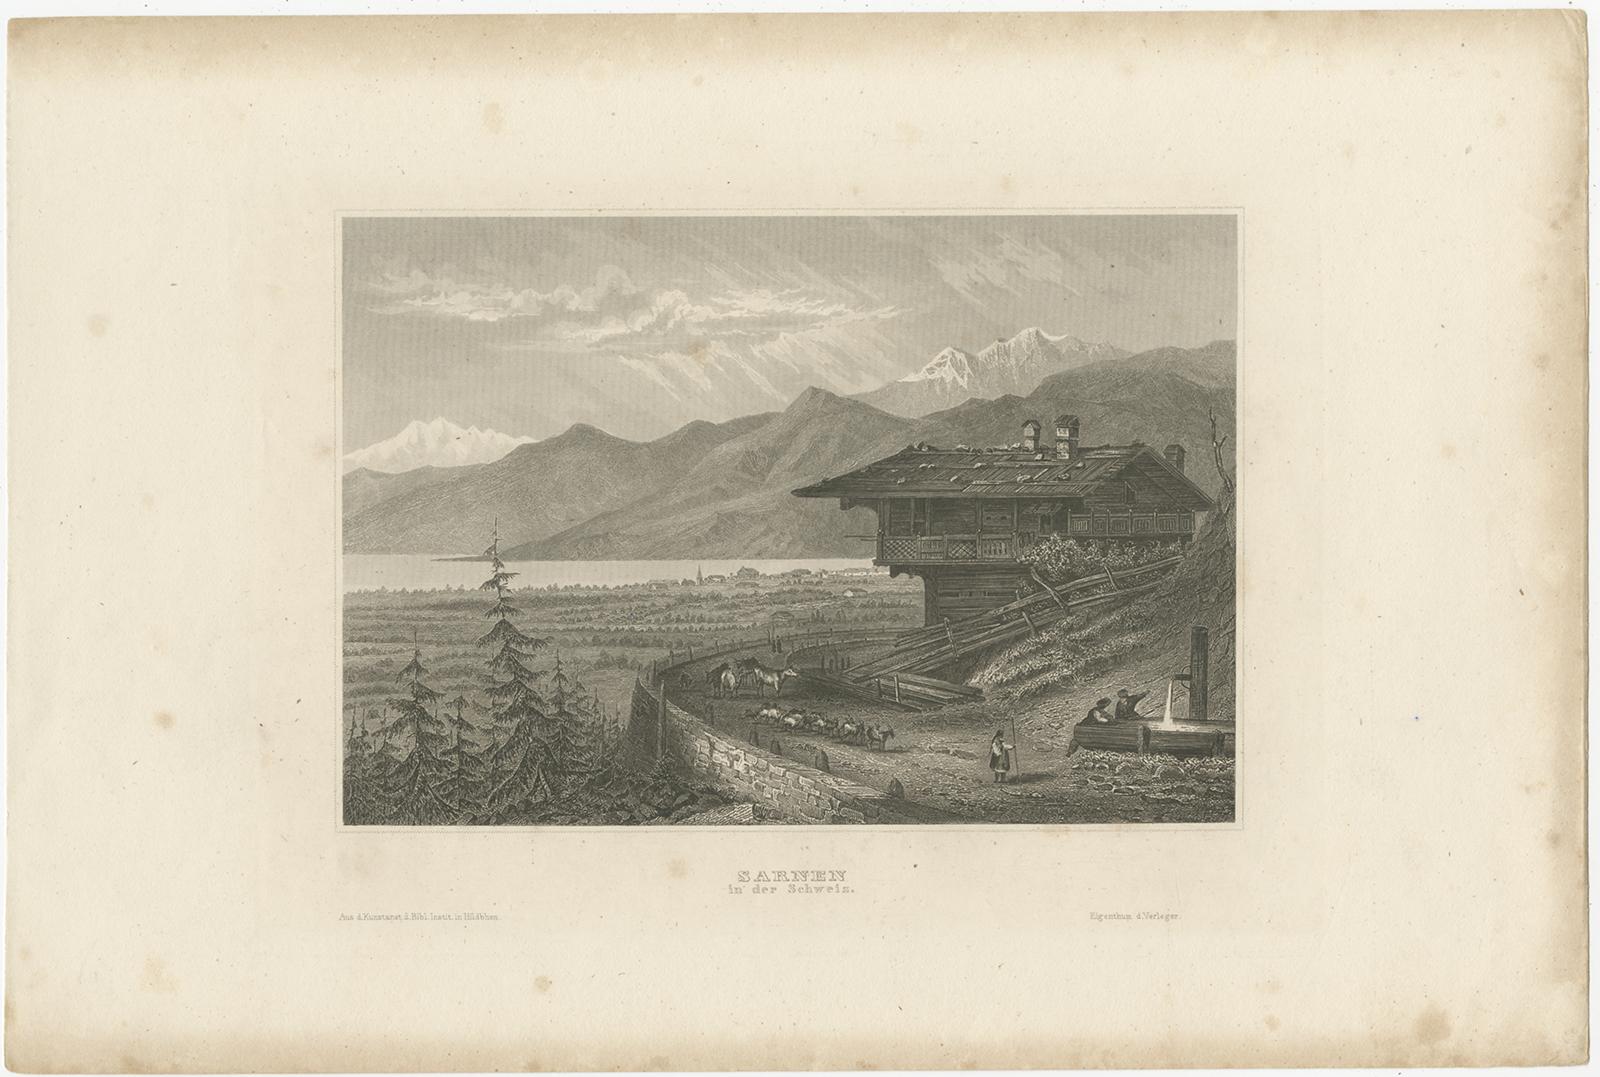 Antique print titled 'Sarnen in der Schweiz. View of Sarnen, Switzerland. Originates from 'Meyers Universum'. Published circa 1860. 

Joseph Meyer (May 9, 1796 - June 27, 1856) was a German industrialist and publisher, most noted for his